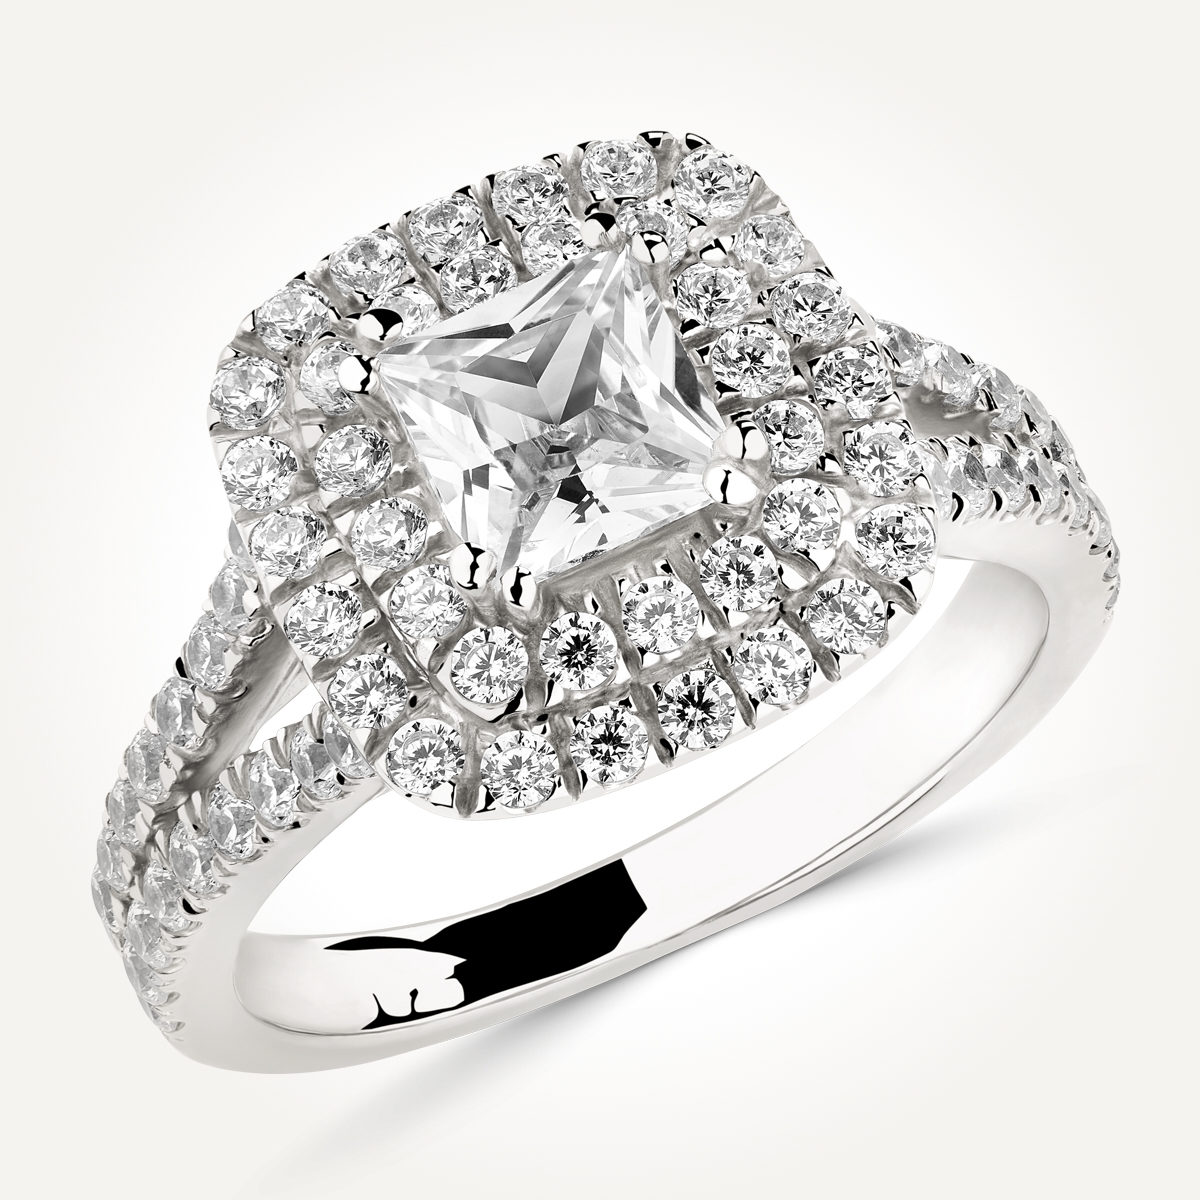 Halo Engagement Ring - 7813 A